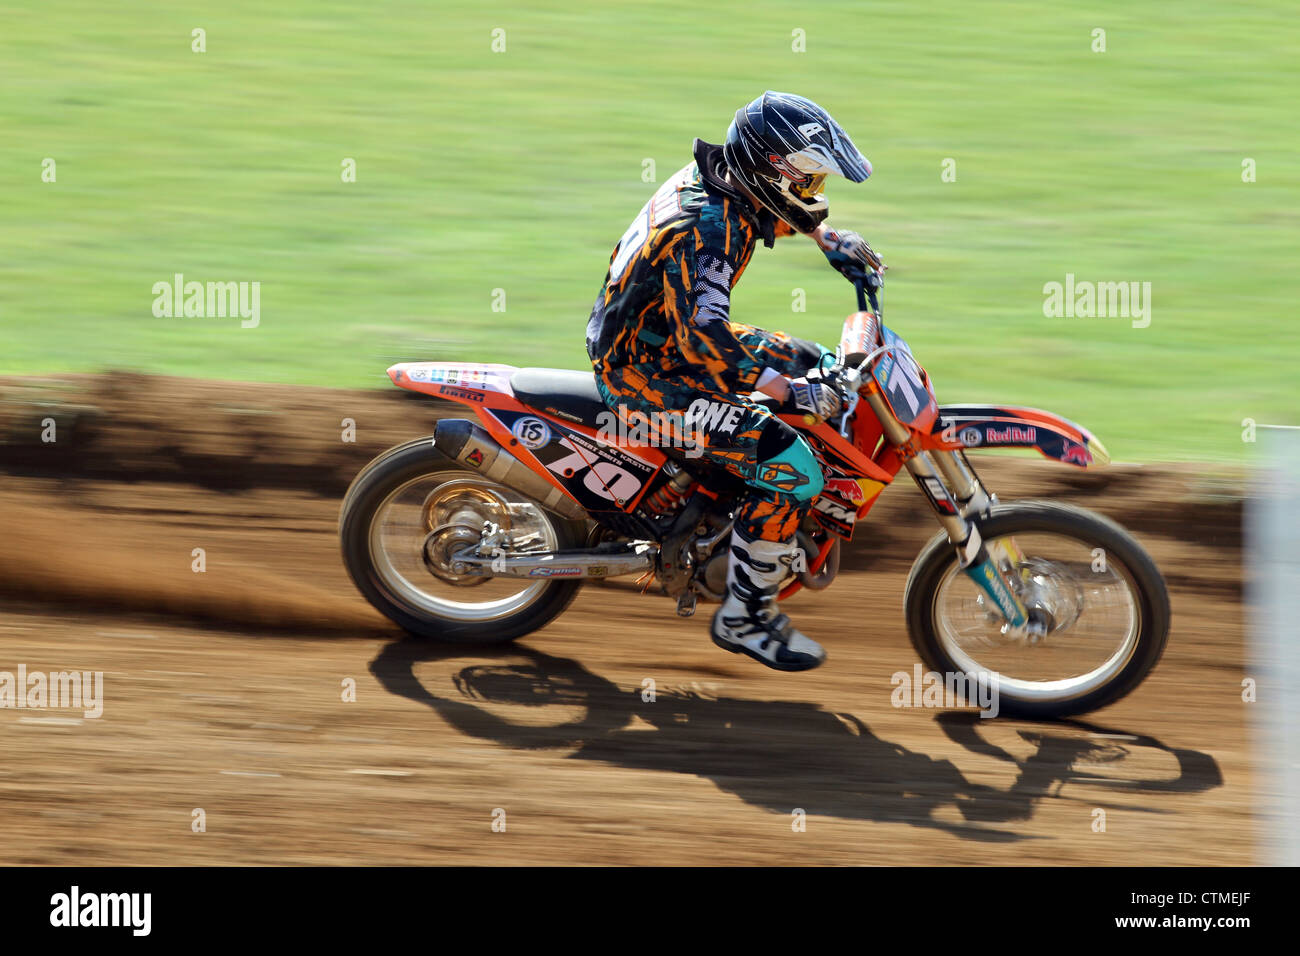 Motocross racer at speed during race at Rhynie, Scotland Stock Photo